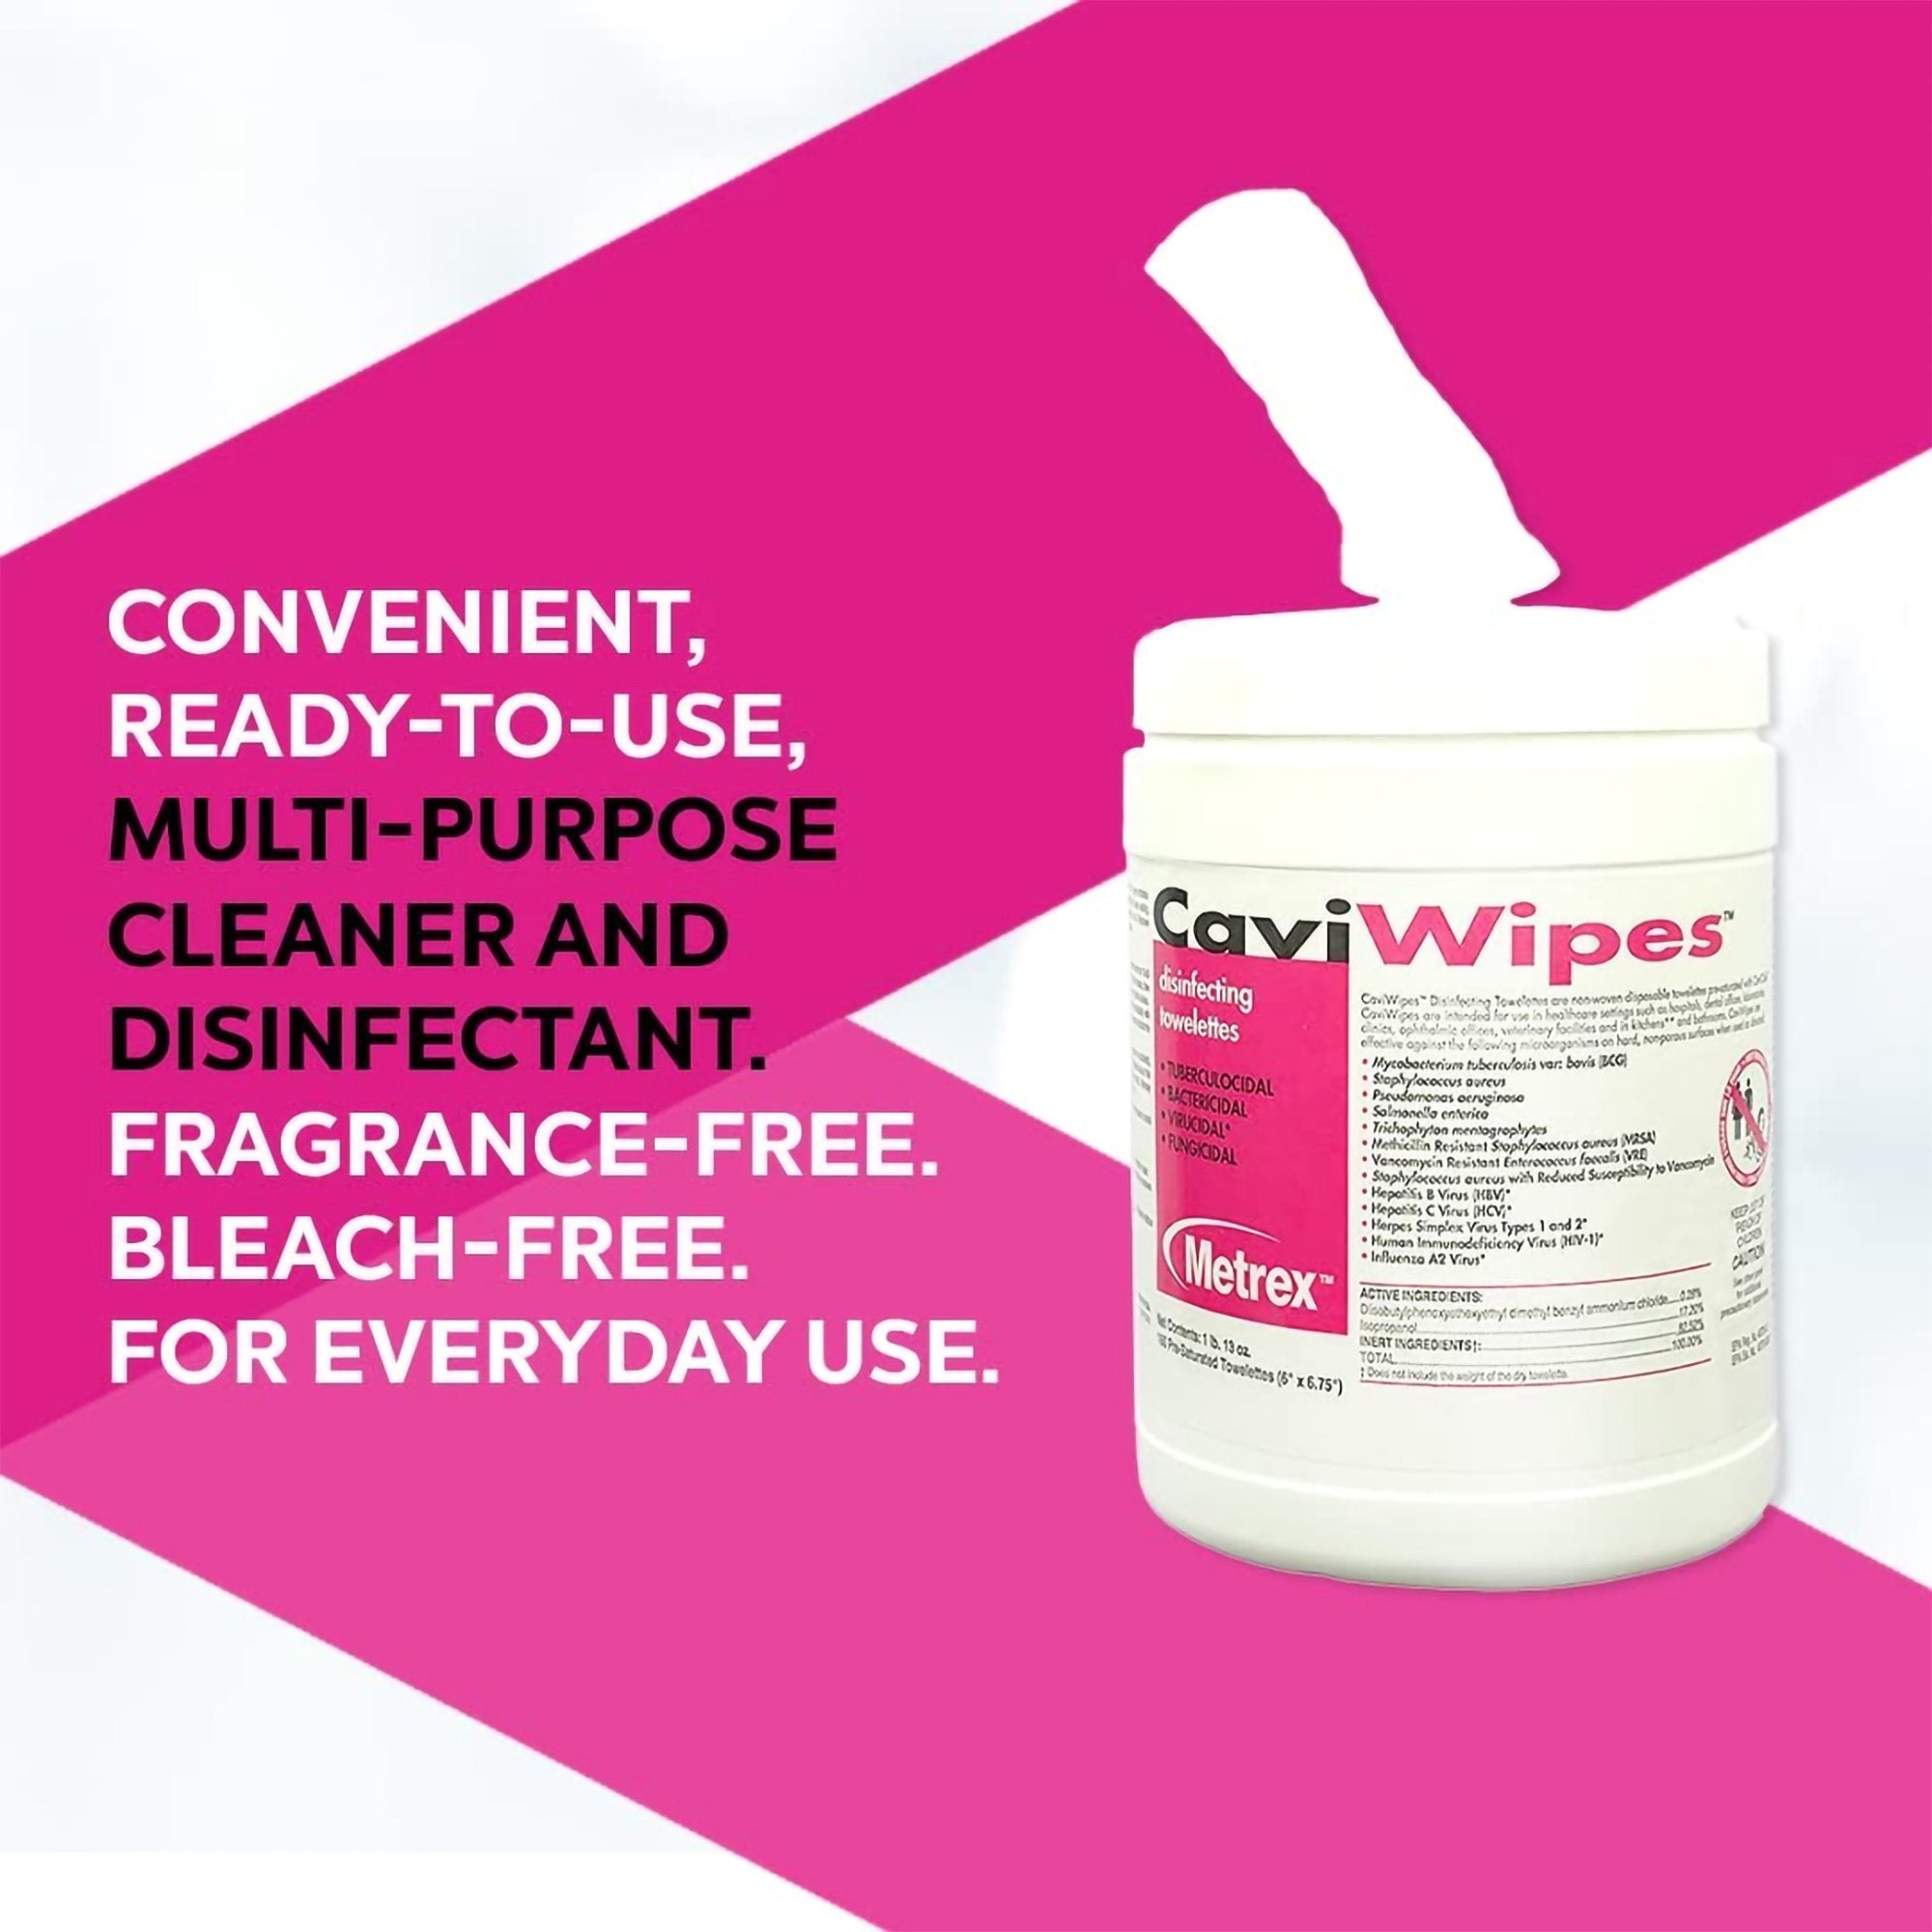 Metrex CaviWipes Surface Disinfectant Alcohol-Based Wipes, Non-Sterile, Disposable, Alcohol Scent, Canister, 6 X 6.75 Inch -Case of 12